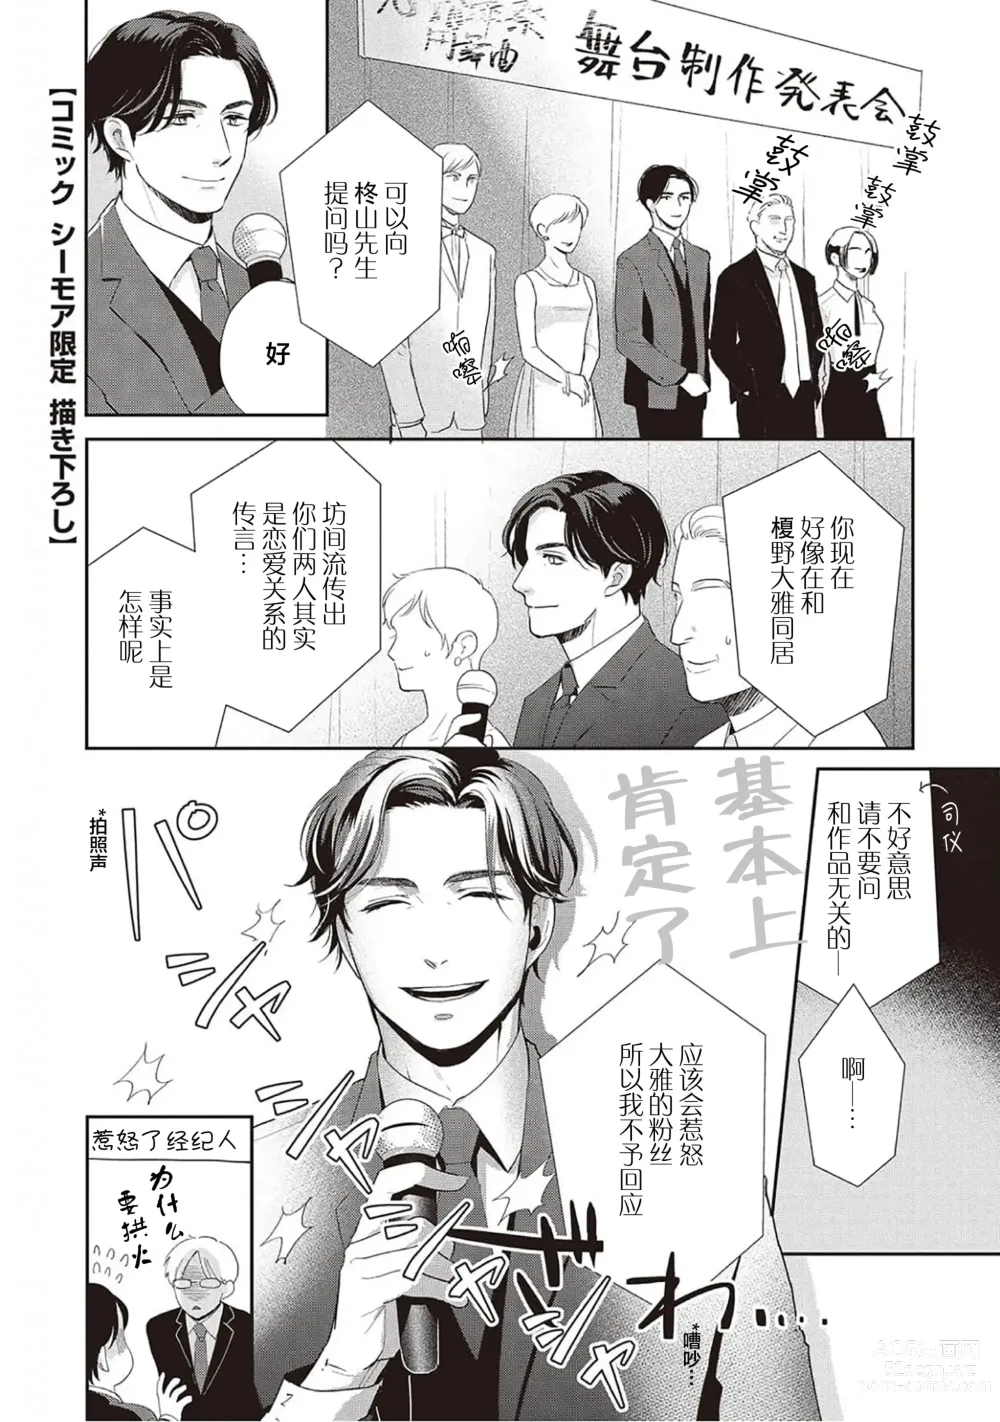 Page 199 of manga Toshiue no hitoーsecond bloomー｜年上之人—second bloom—Chinese]